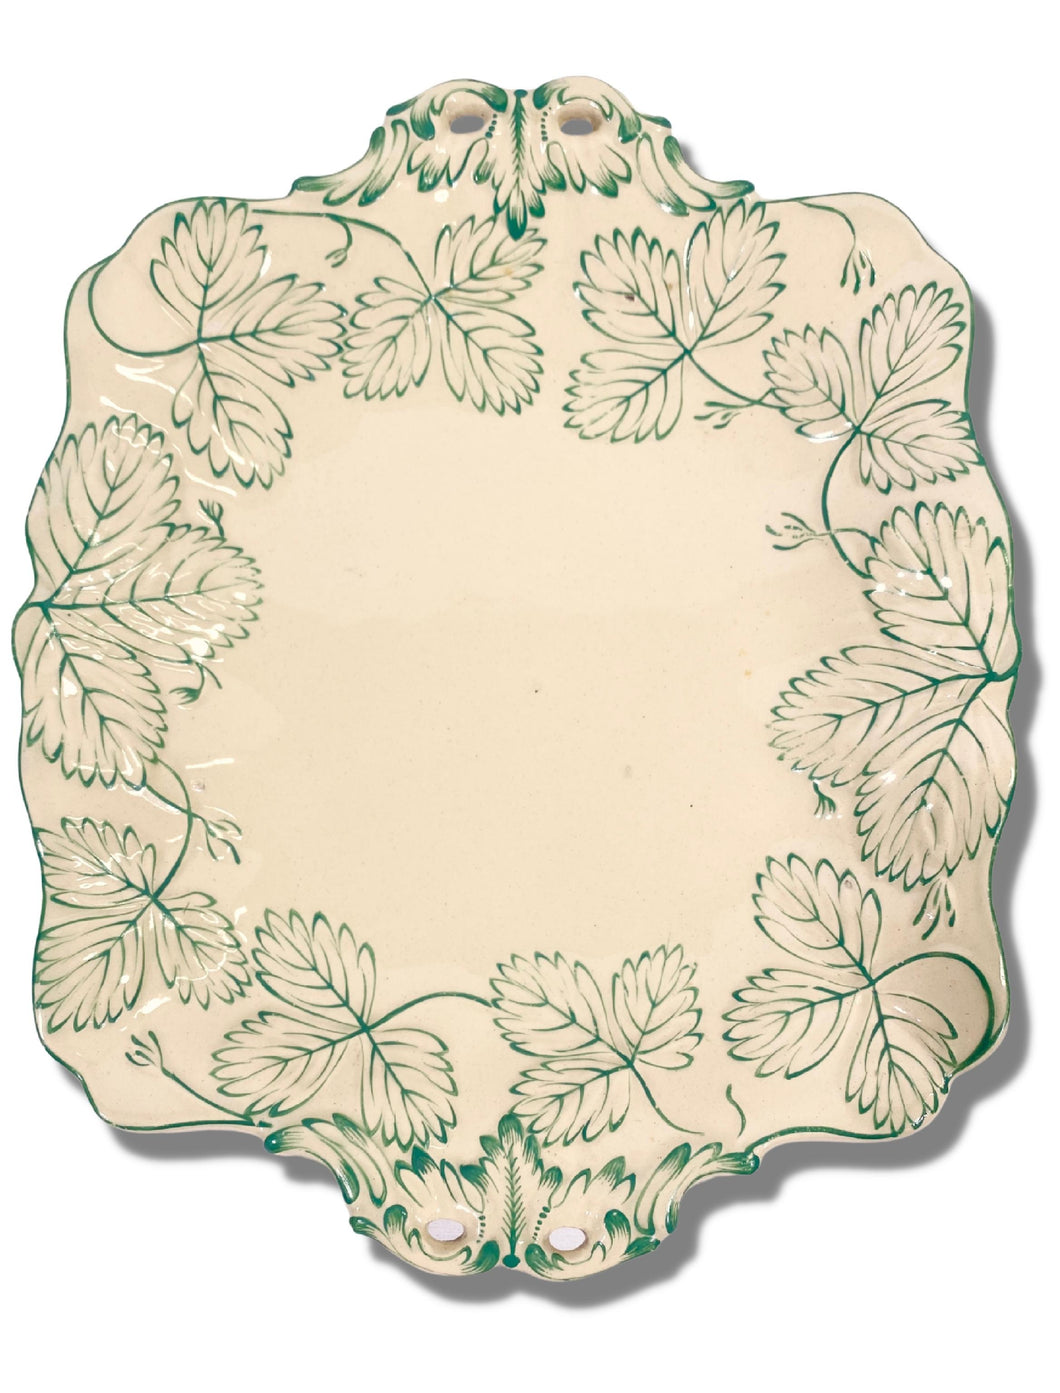 Antique Drabware with Green Leaves